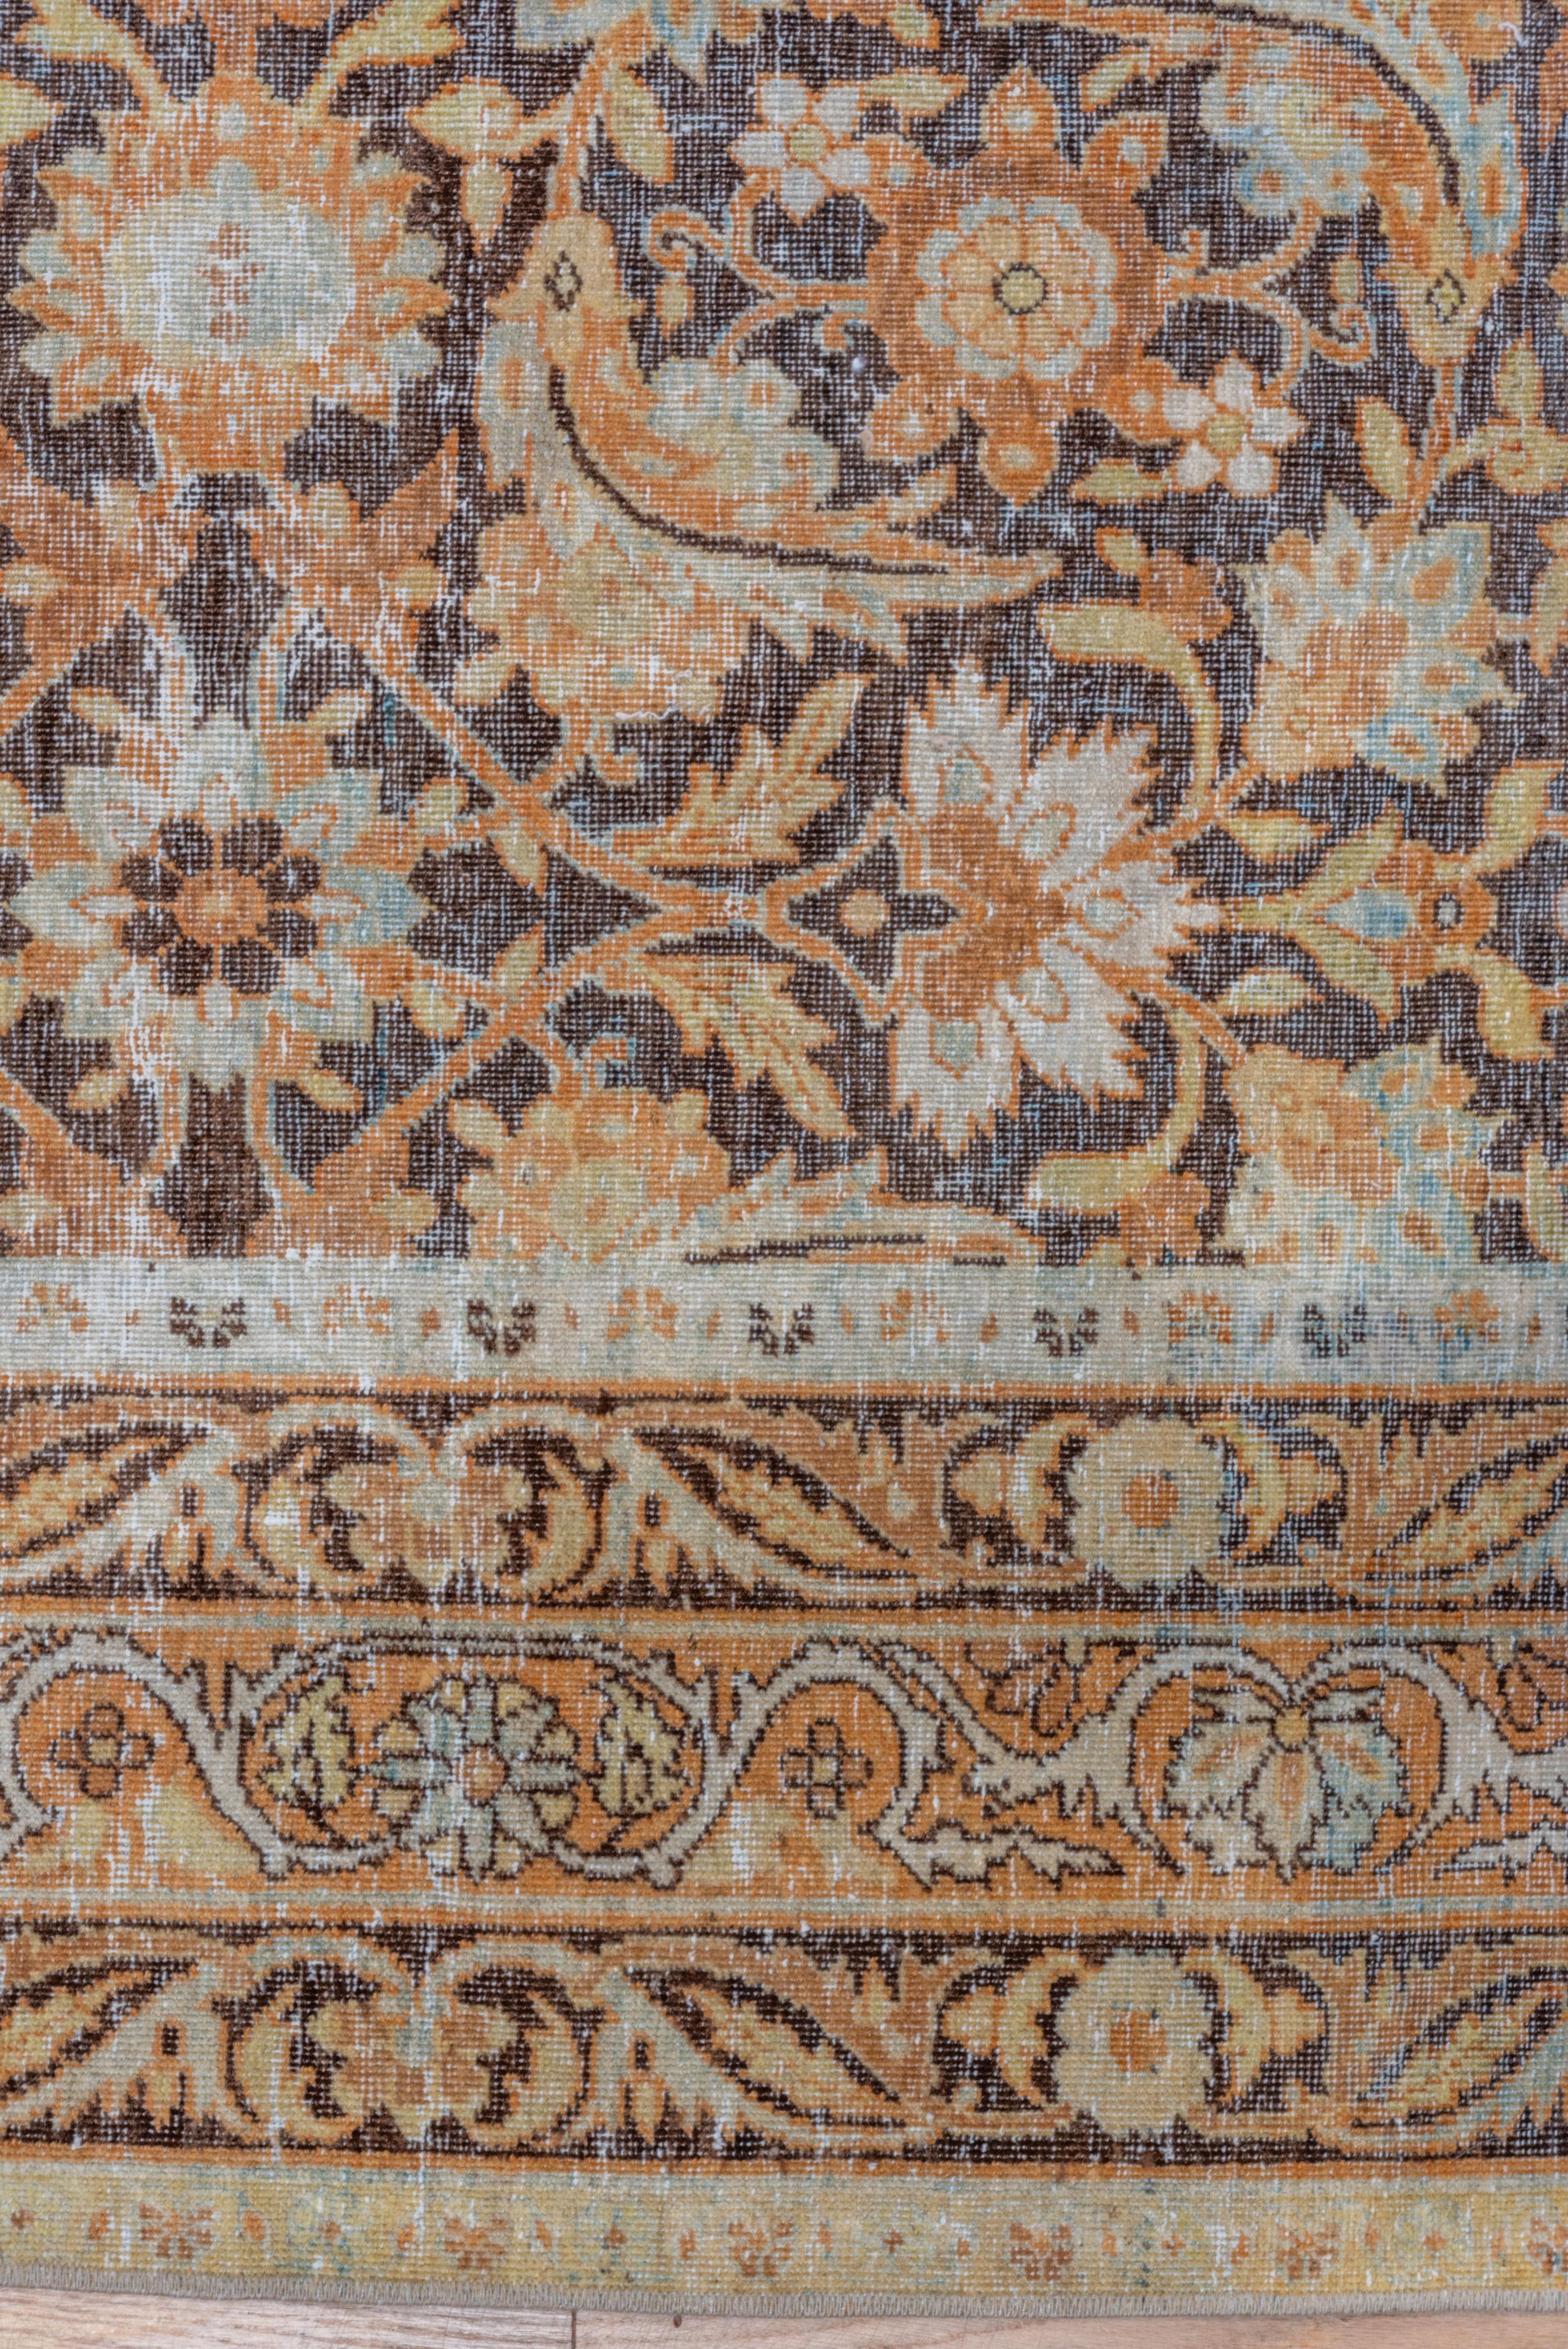 This Kerman actually employs, with some modifications, a Classic Persian carpet pattern. Here the popular Herati design is partially layered on the rich red ground. Similar narrow borders in red and pistachio, with forked leaves and rosettes or